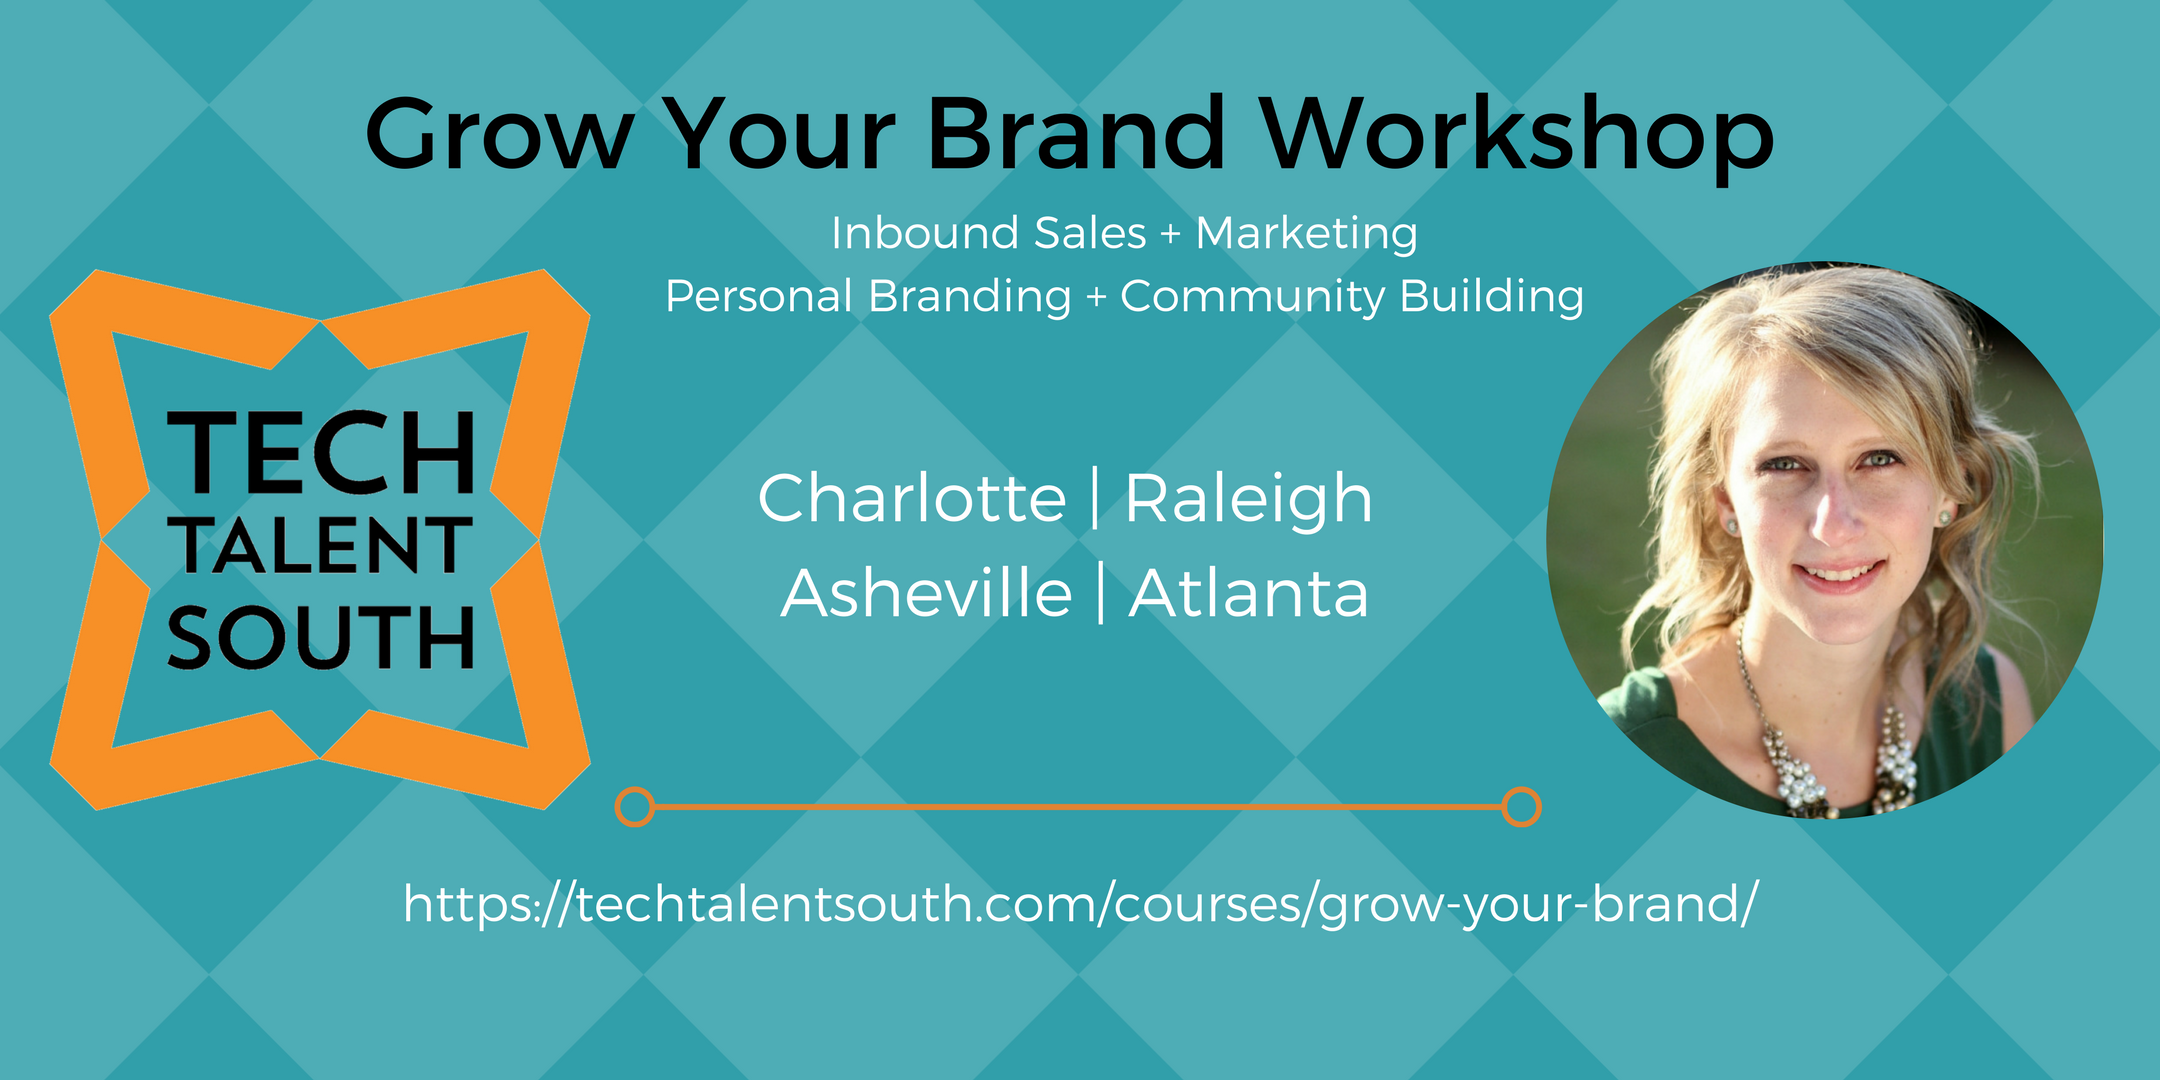 Grow Your Brand Using Digital Marketing Workshop Hitting the Southeast in 2017